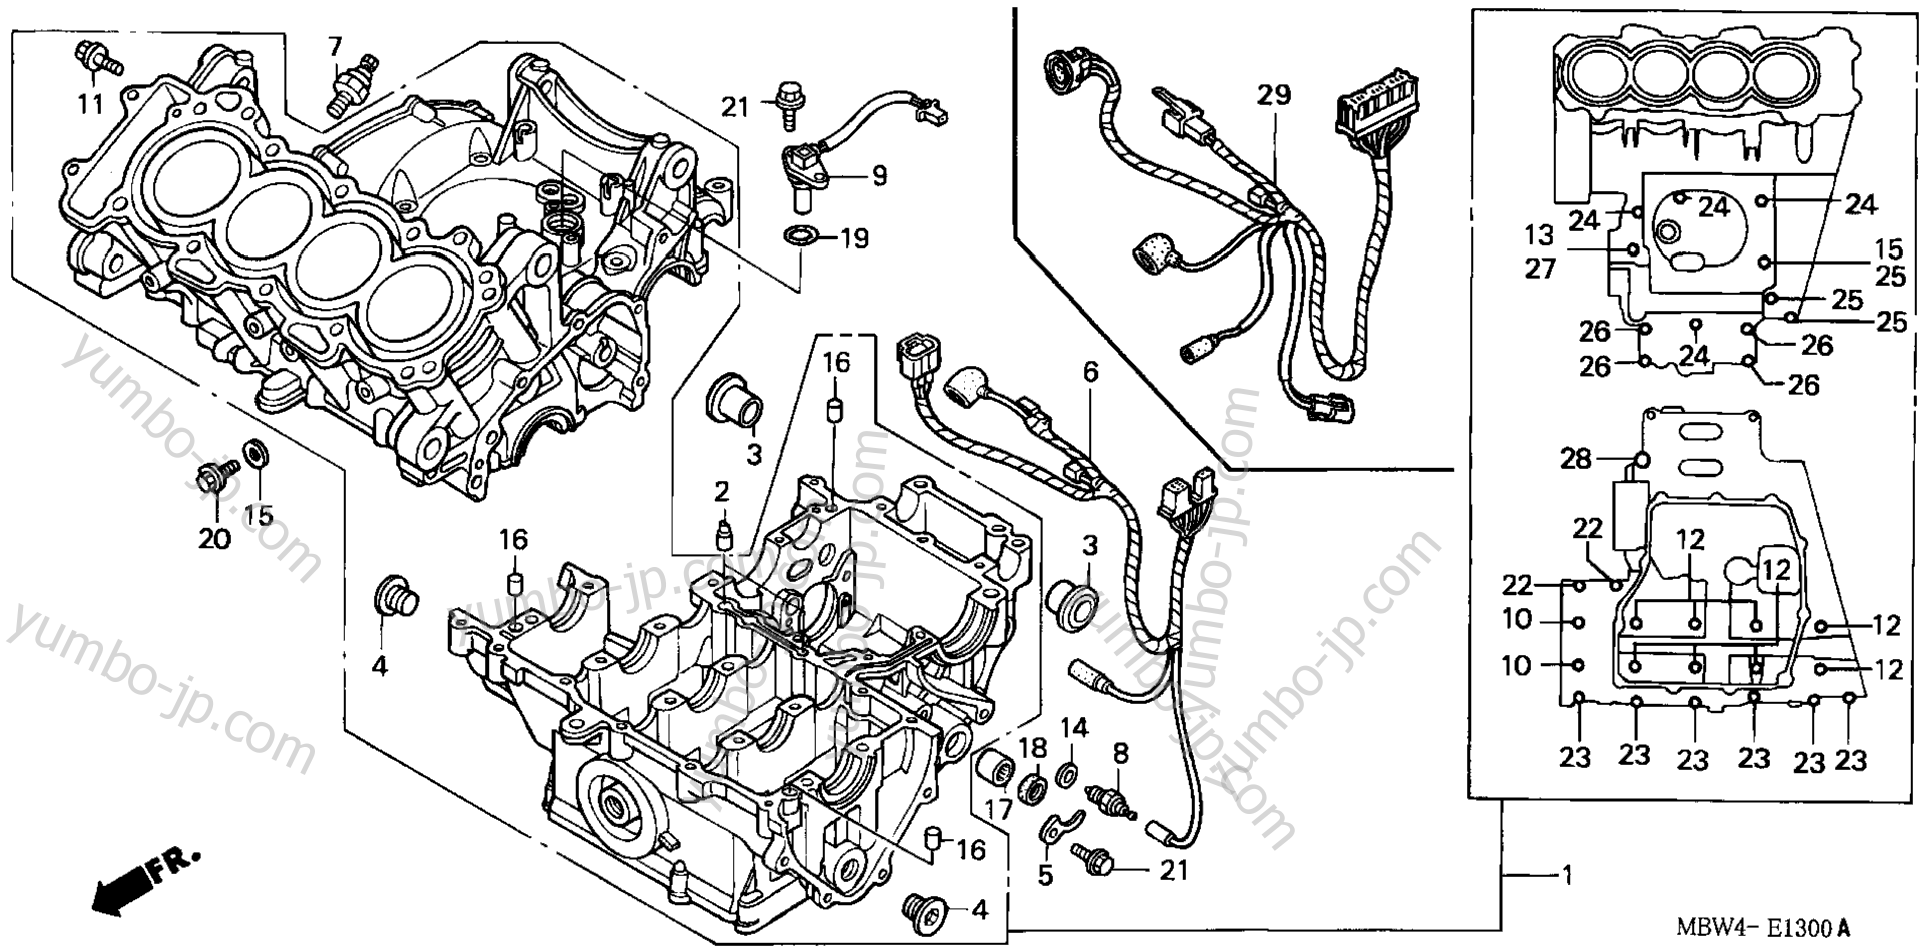 CRANKCASE for motorcycles HONDA CBR600F4 A 2002 year